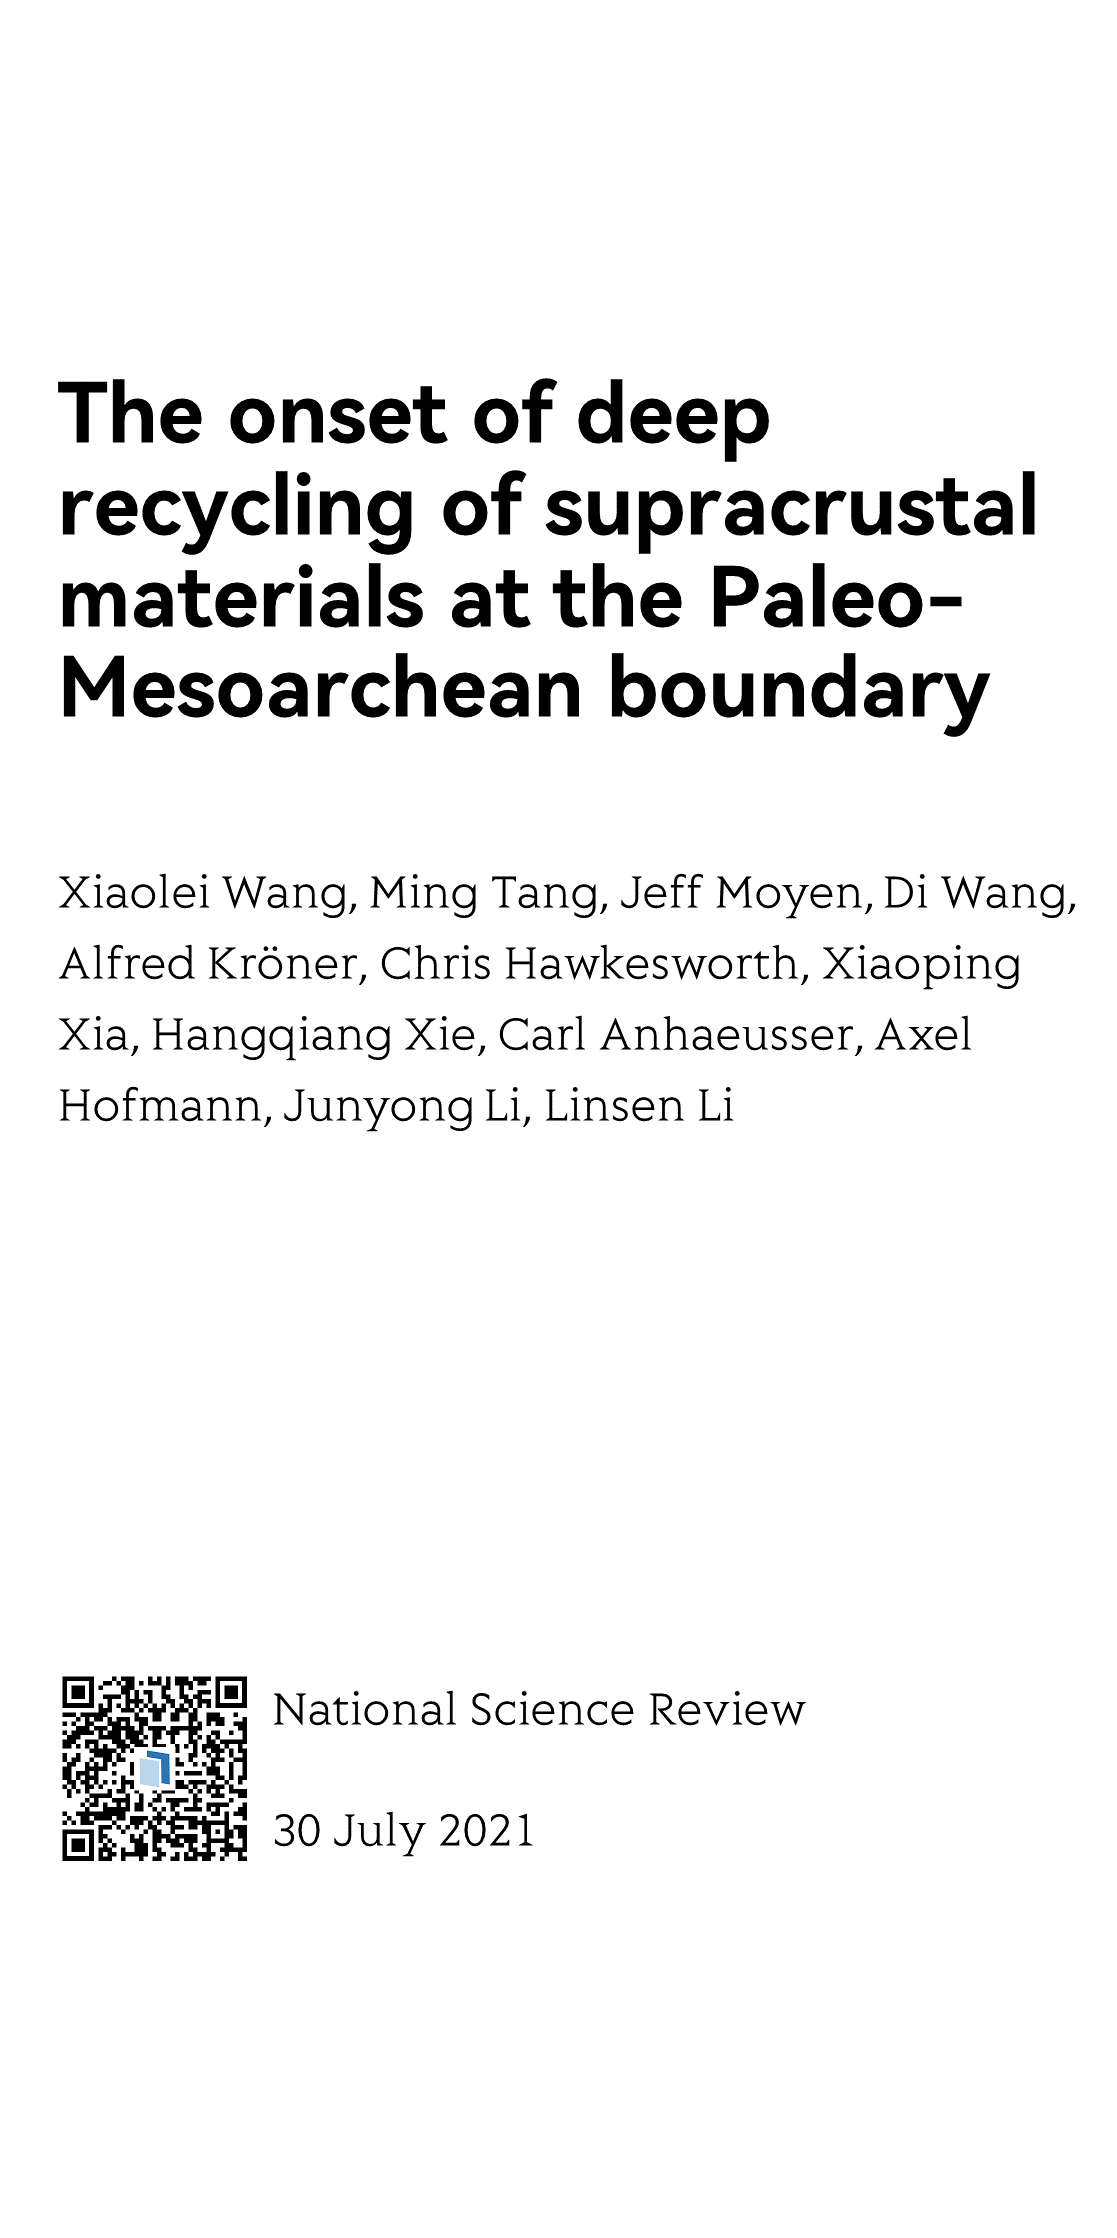 The onset of deep recycling of supracrustal materials at the Paleo-Mesoarchean boundary_1